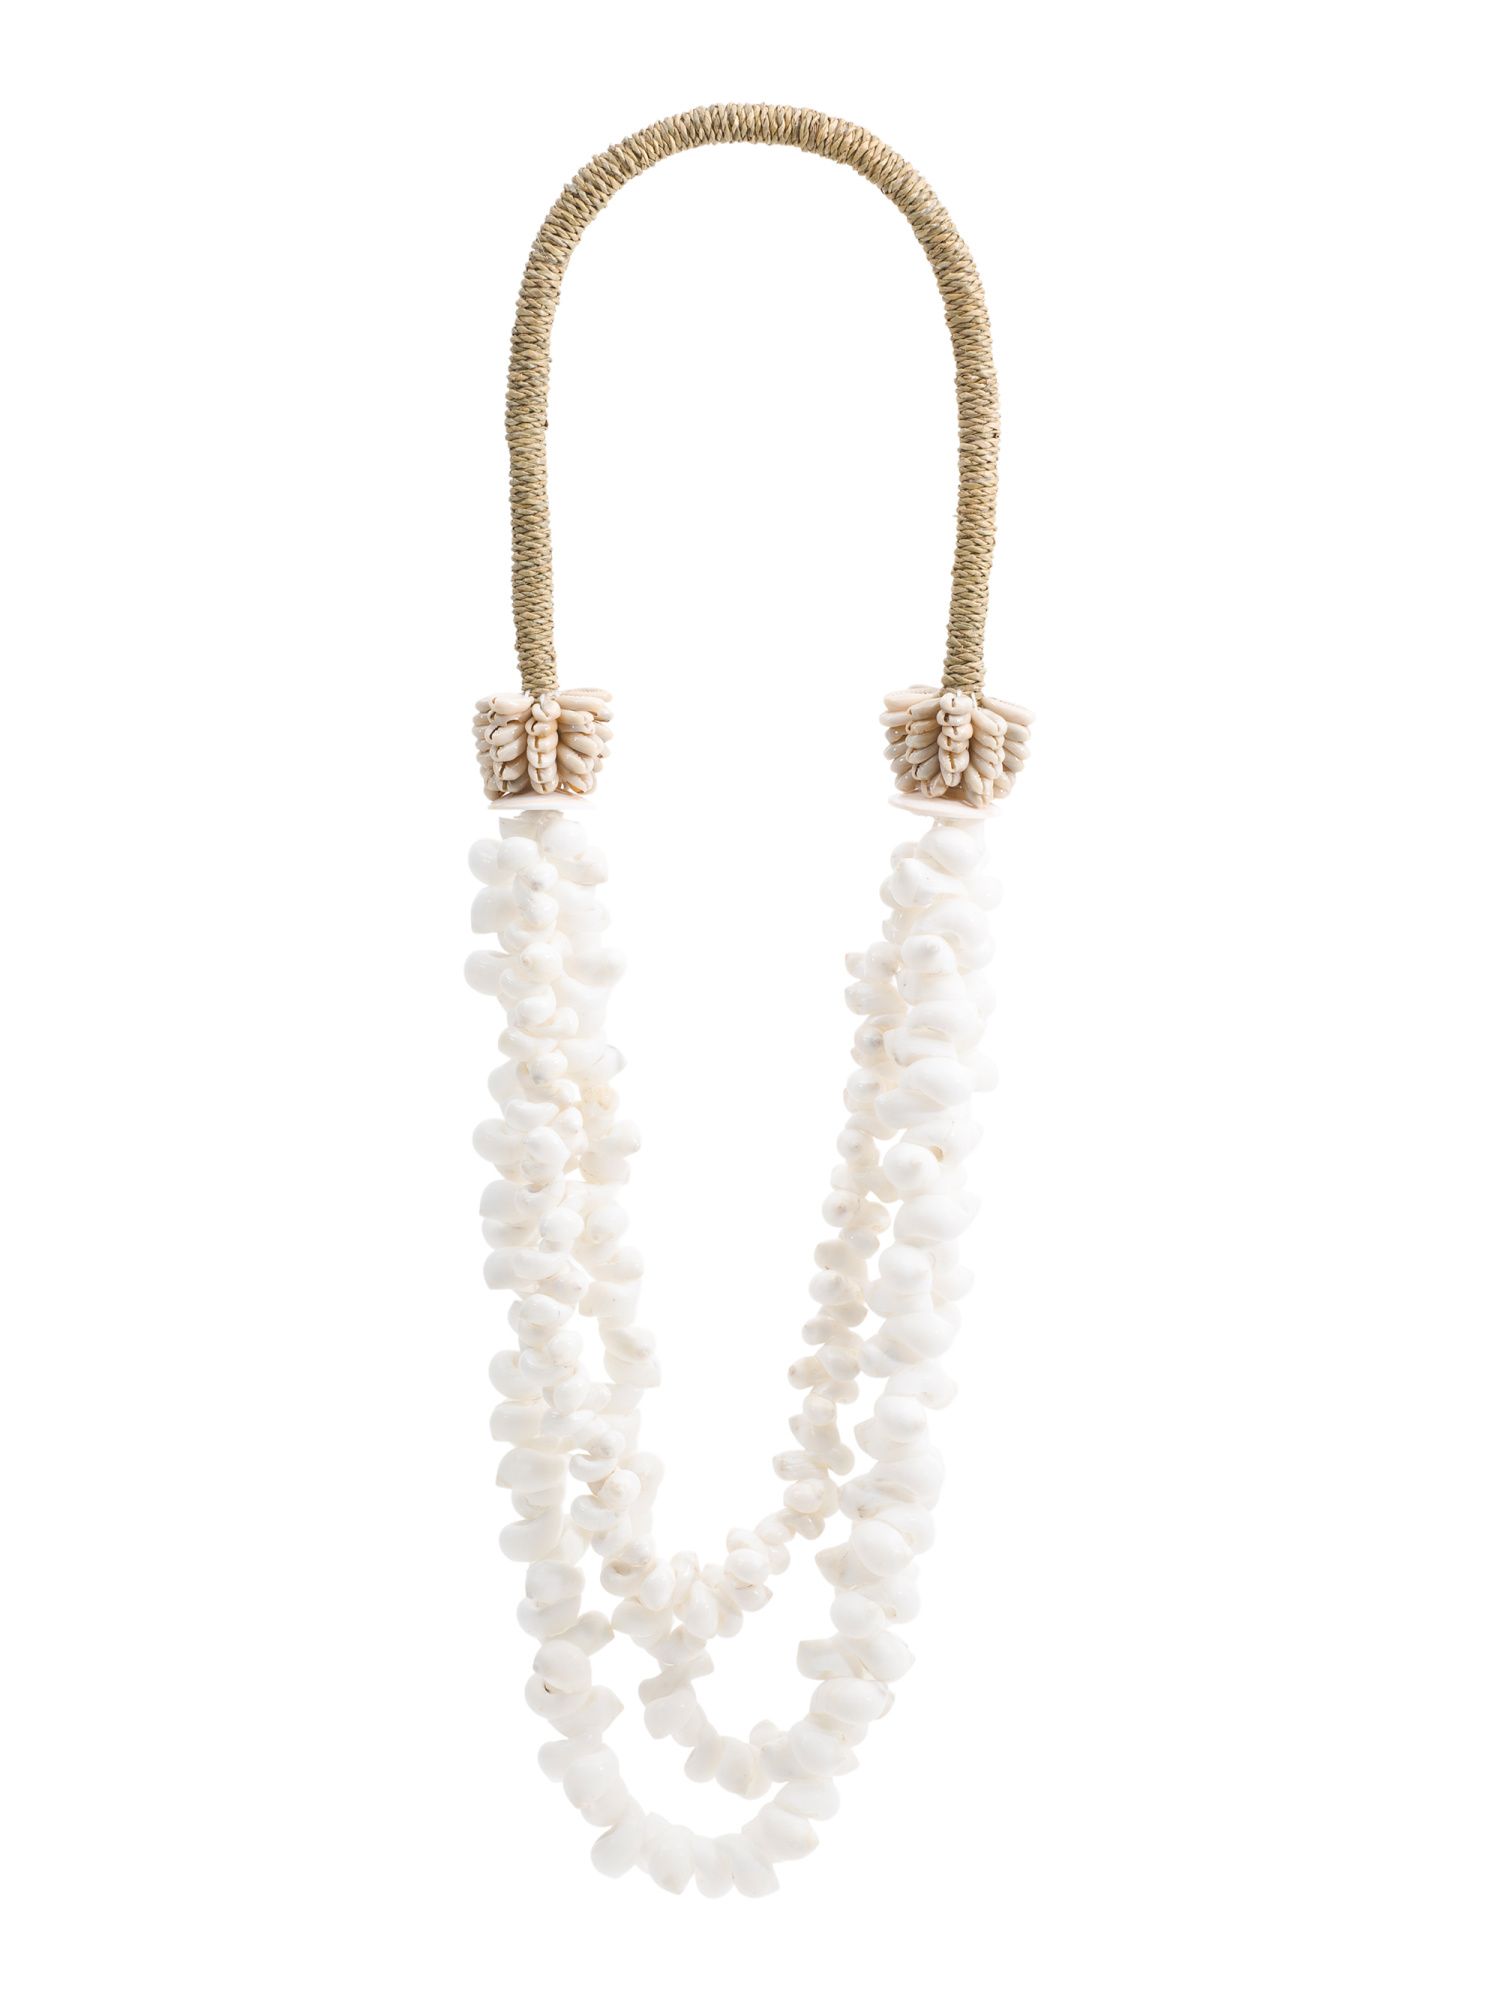 Made In Indonesia Shell Decorative Necklace | TJ Maxx